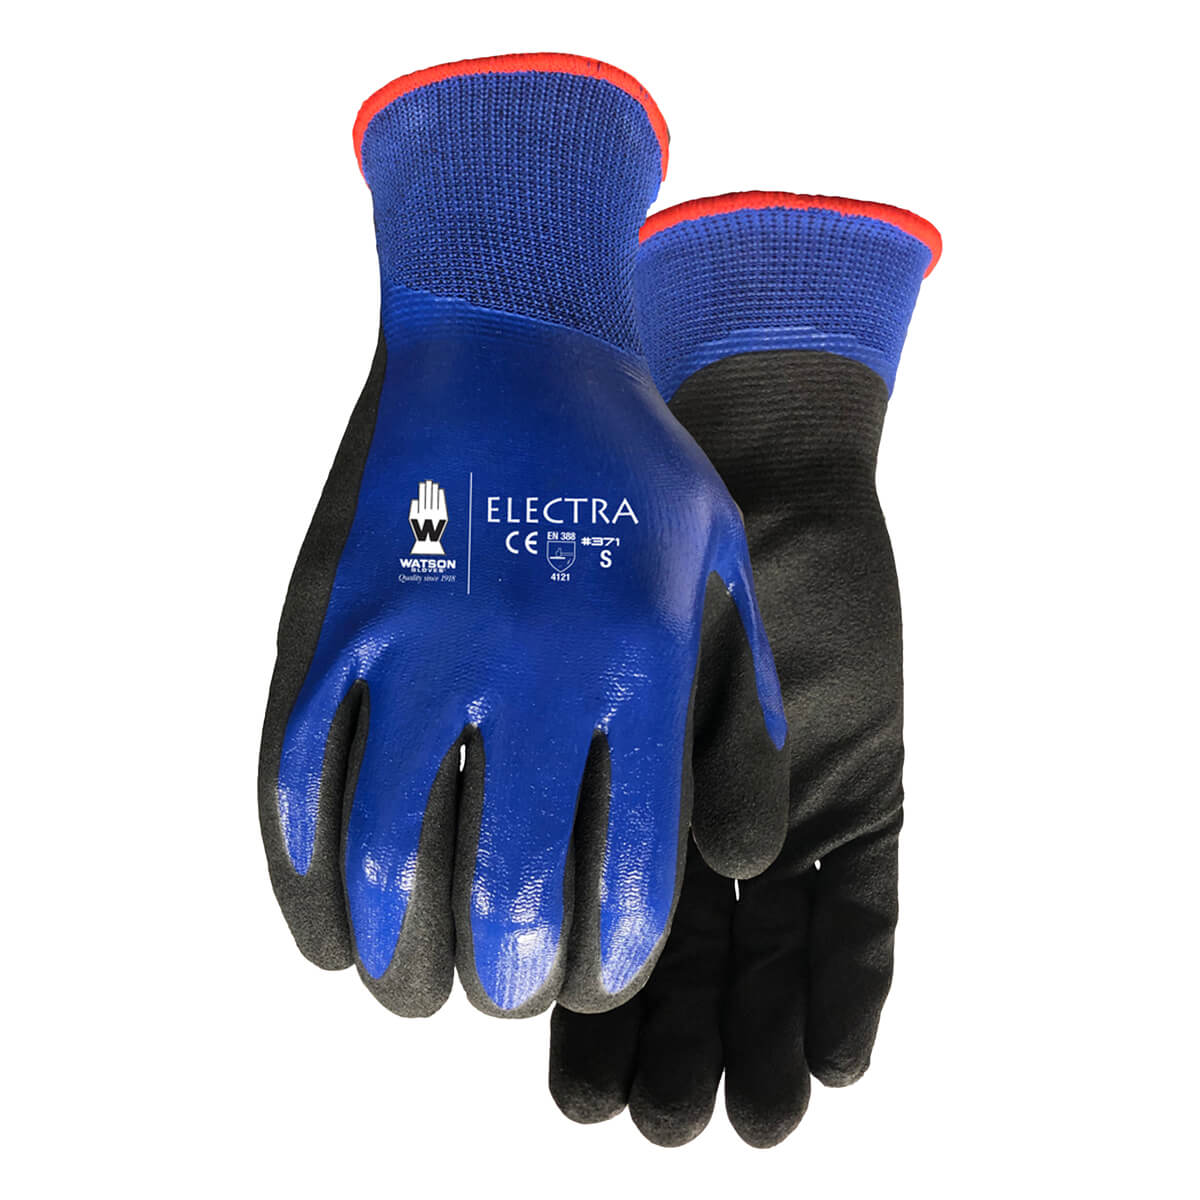 Electra Water Resistant Gloves - M